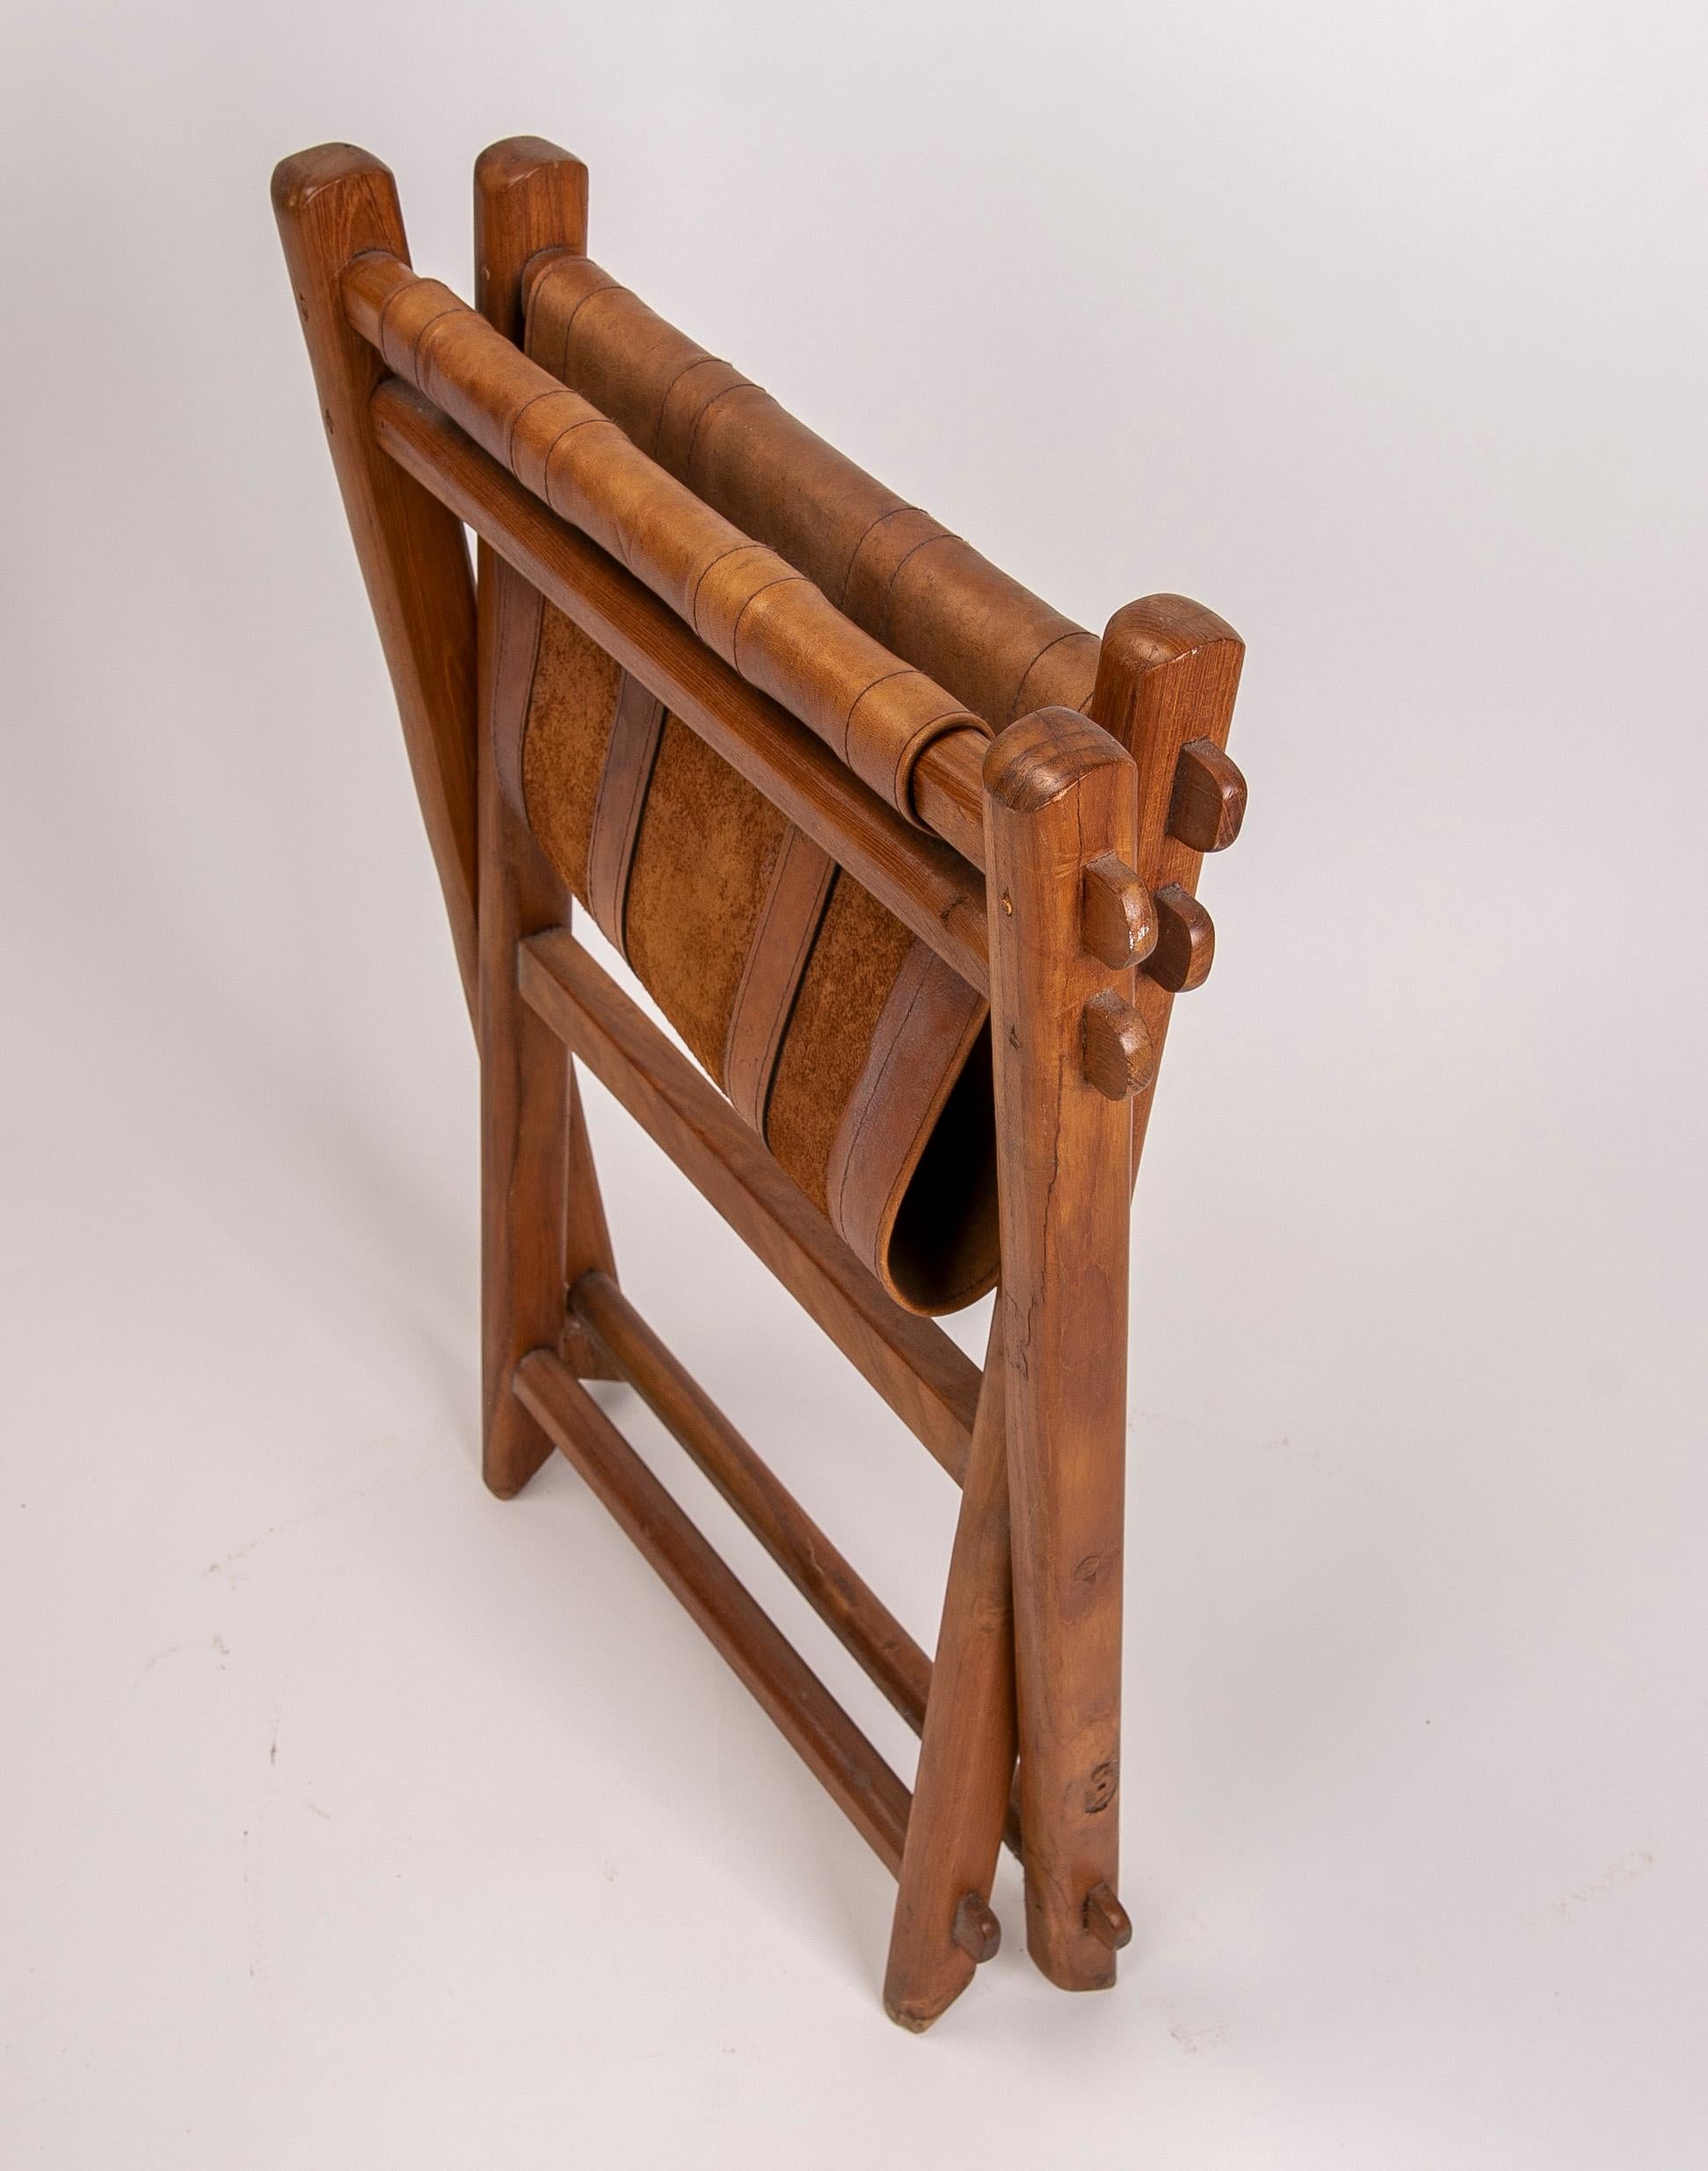 1970s leather and wooden folding chair.